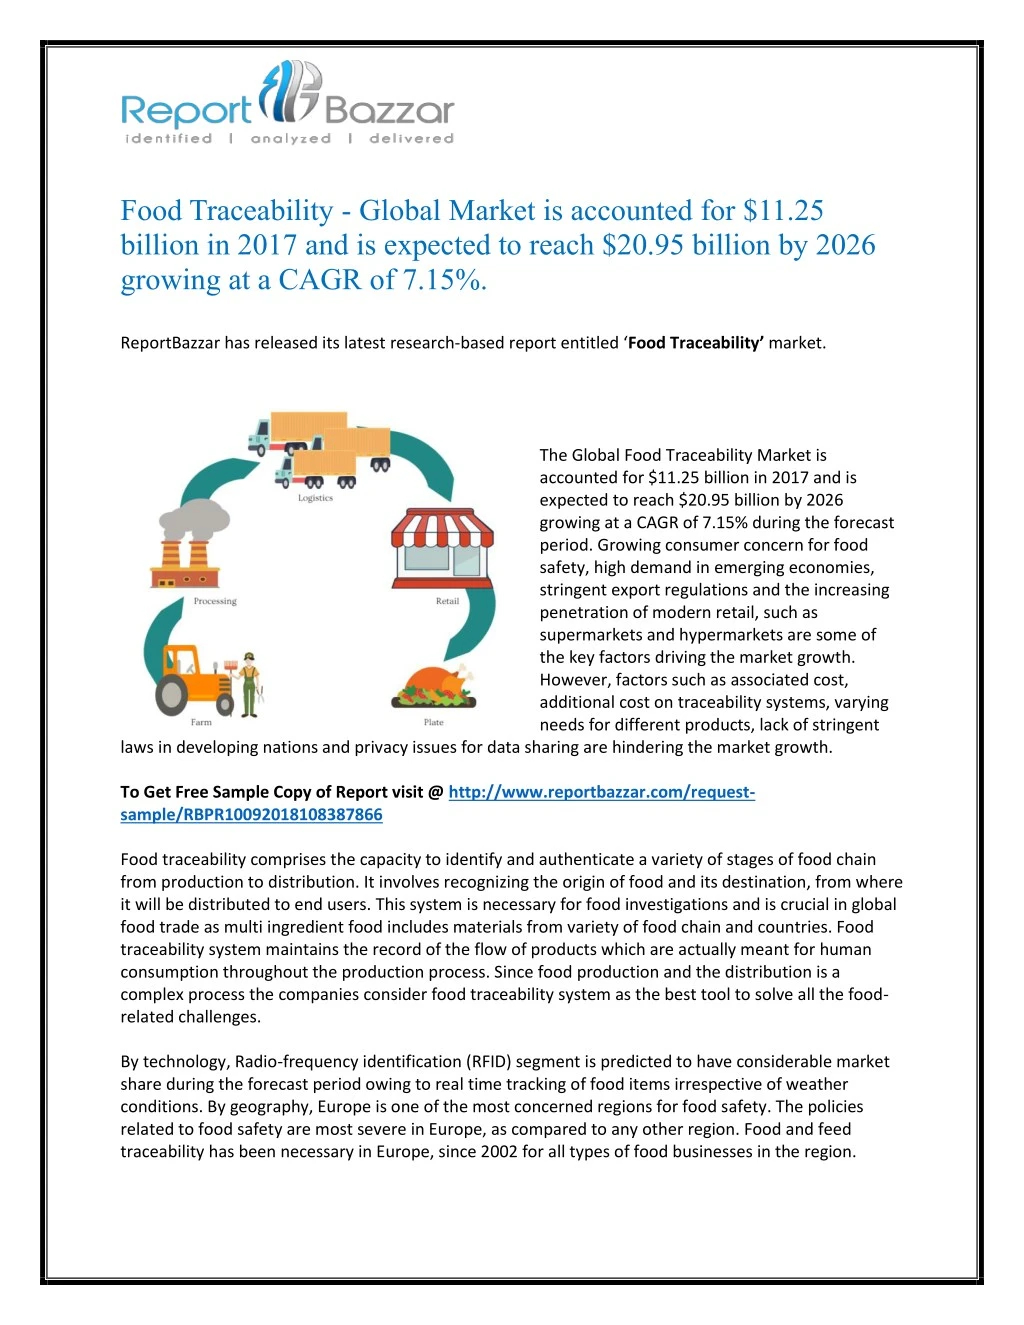 food traceability global market is accounted